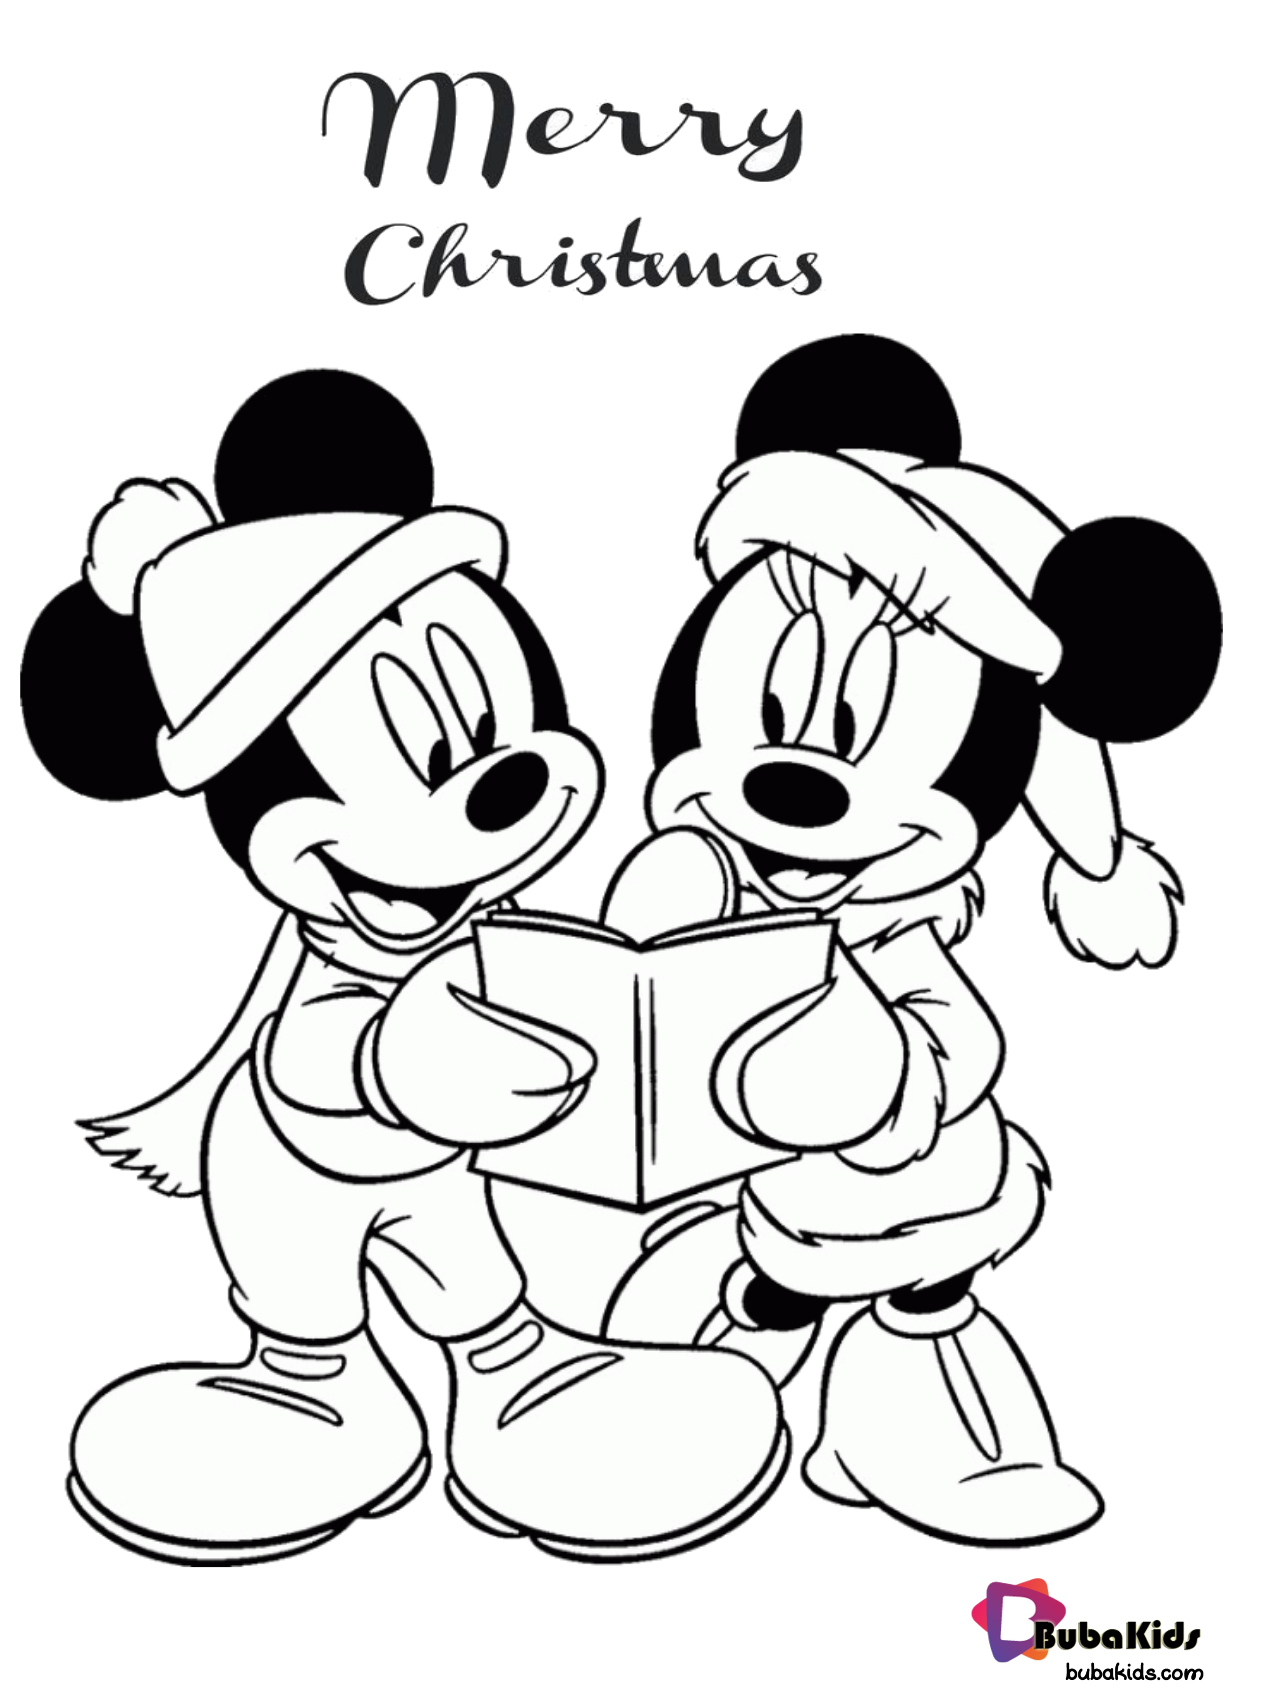 Mickey and Minnie Mouse merry christmas coloring picture. Wallpaper